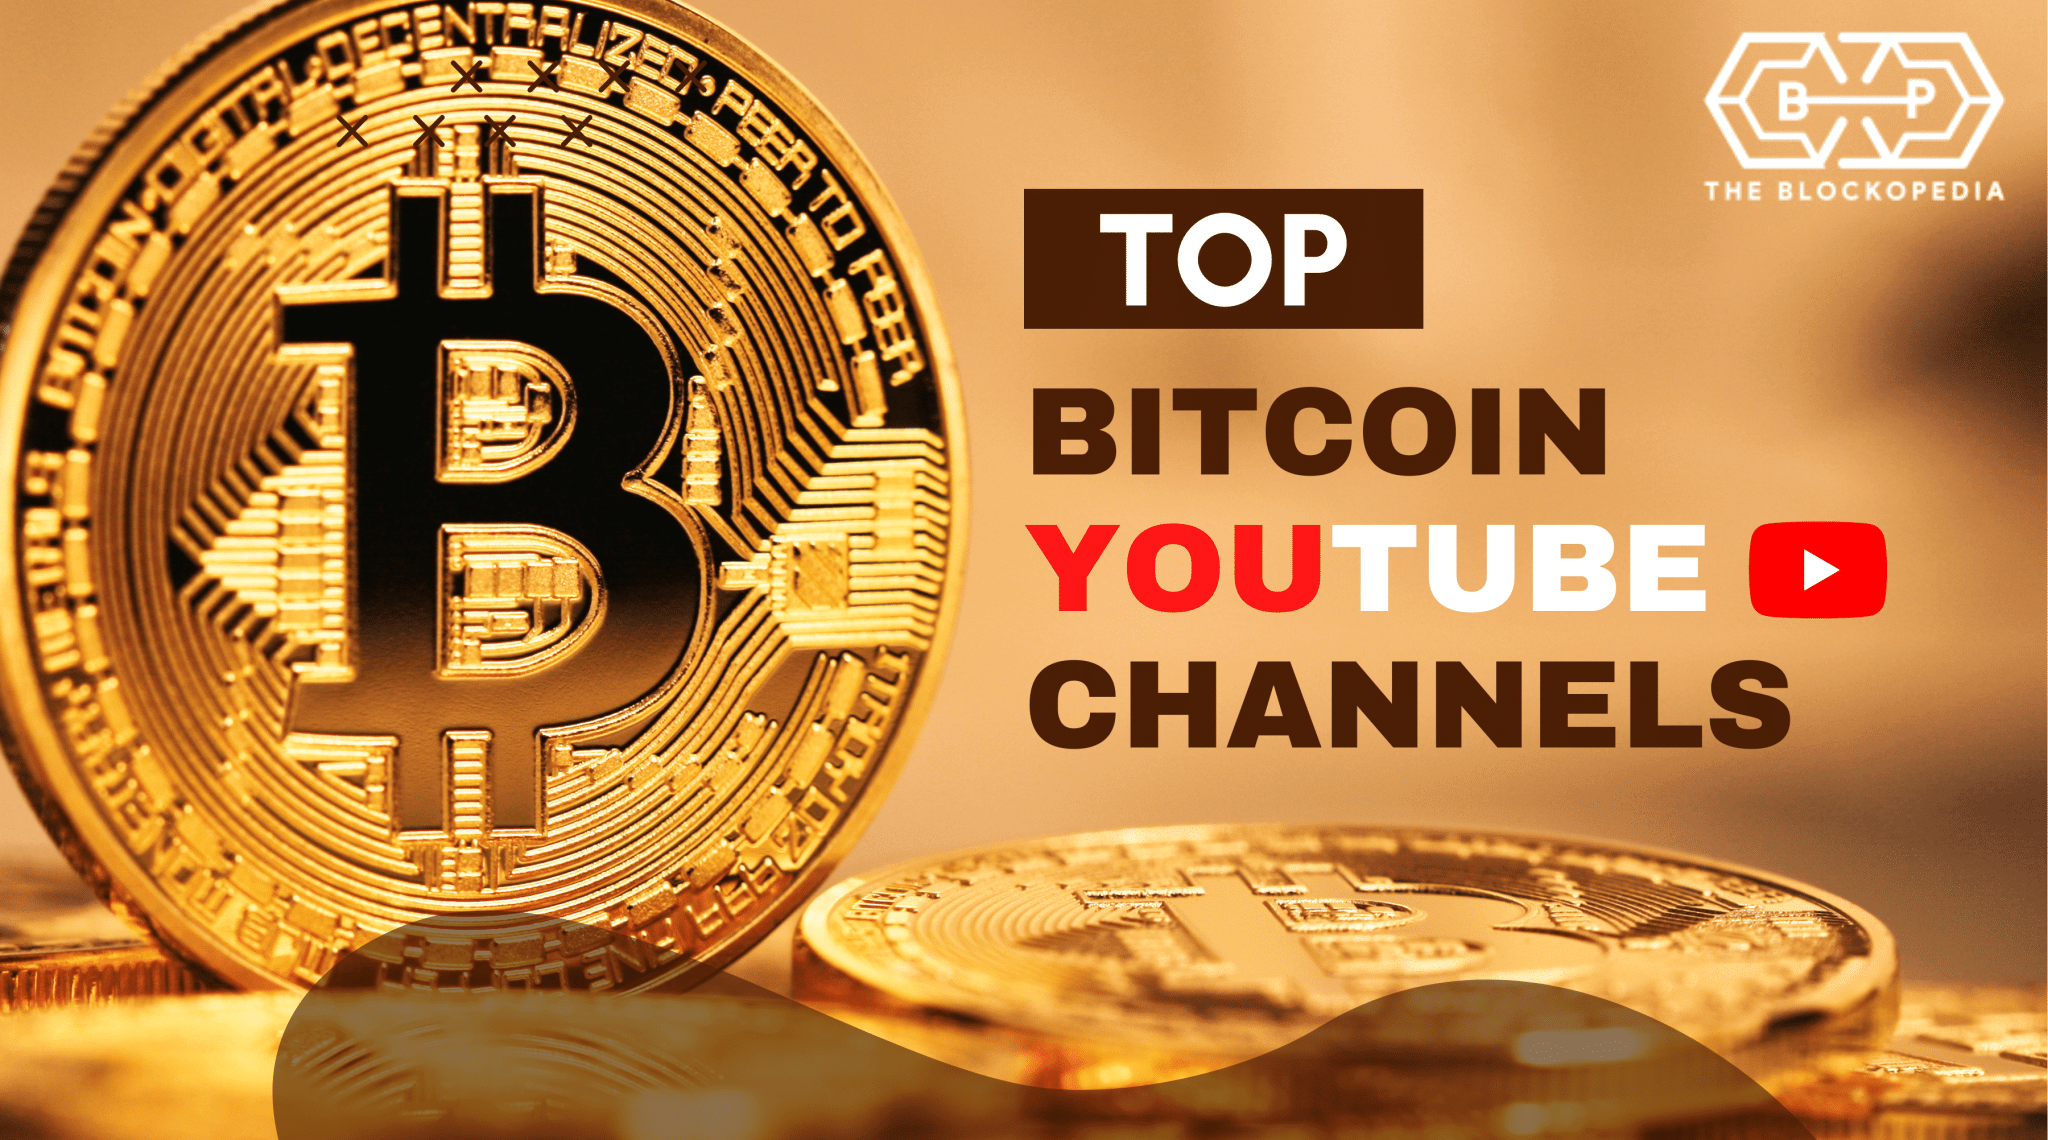 Top 10 YouTube Channels For Bitcoin